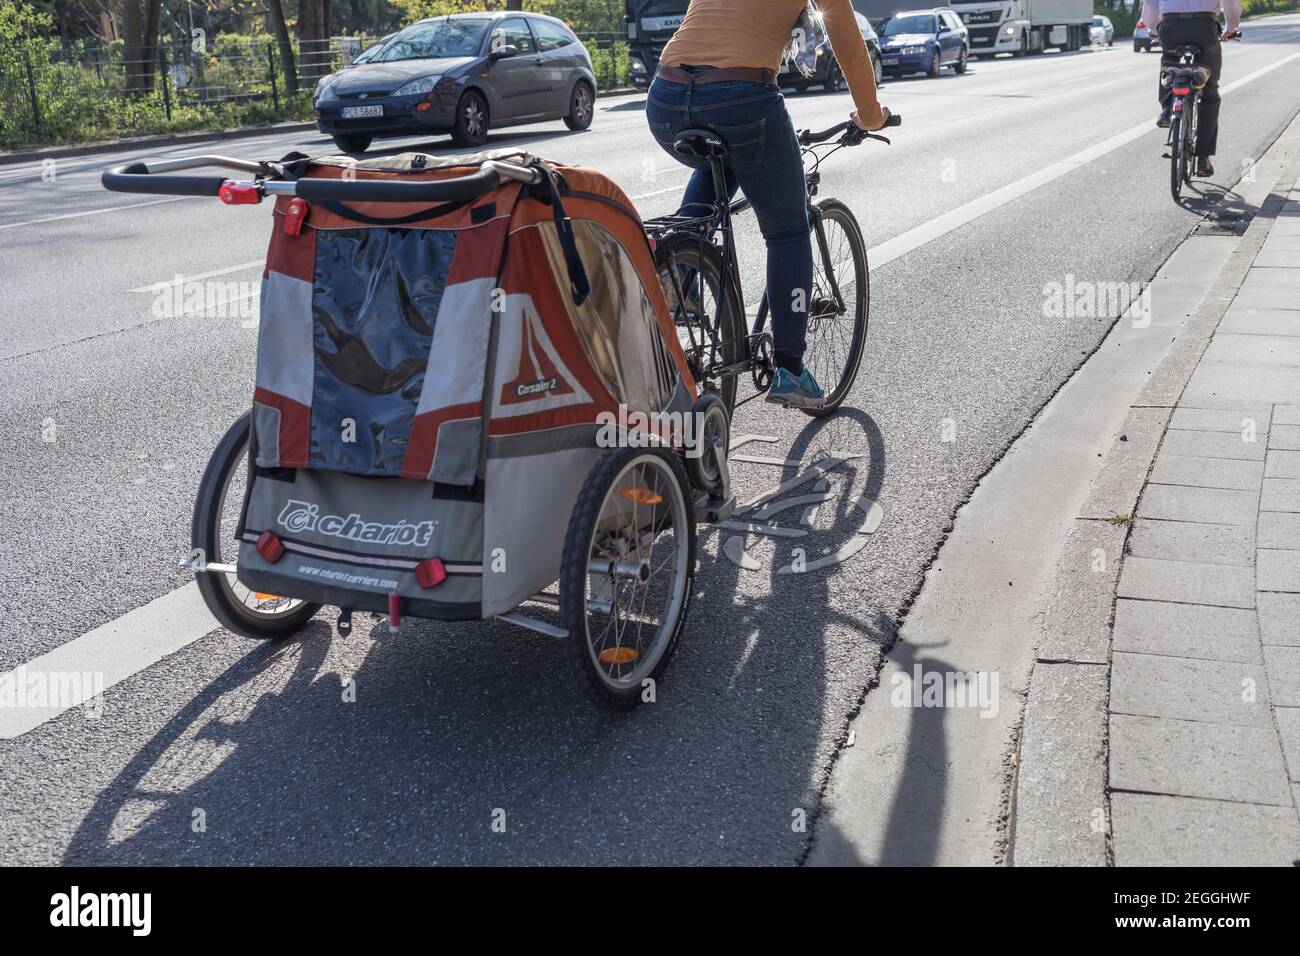 bike trailer on cycle lane in the city Stock Photo